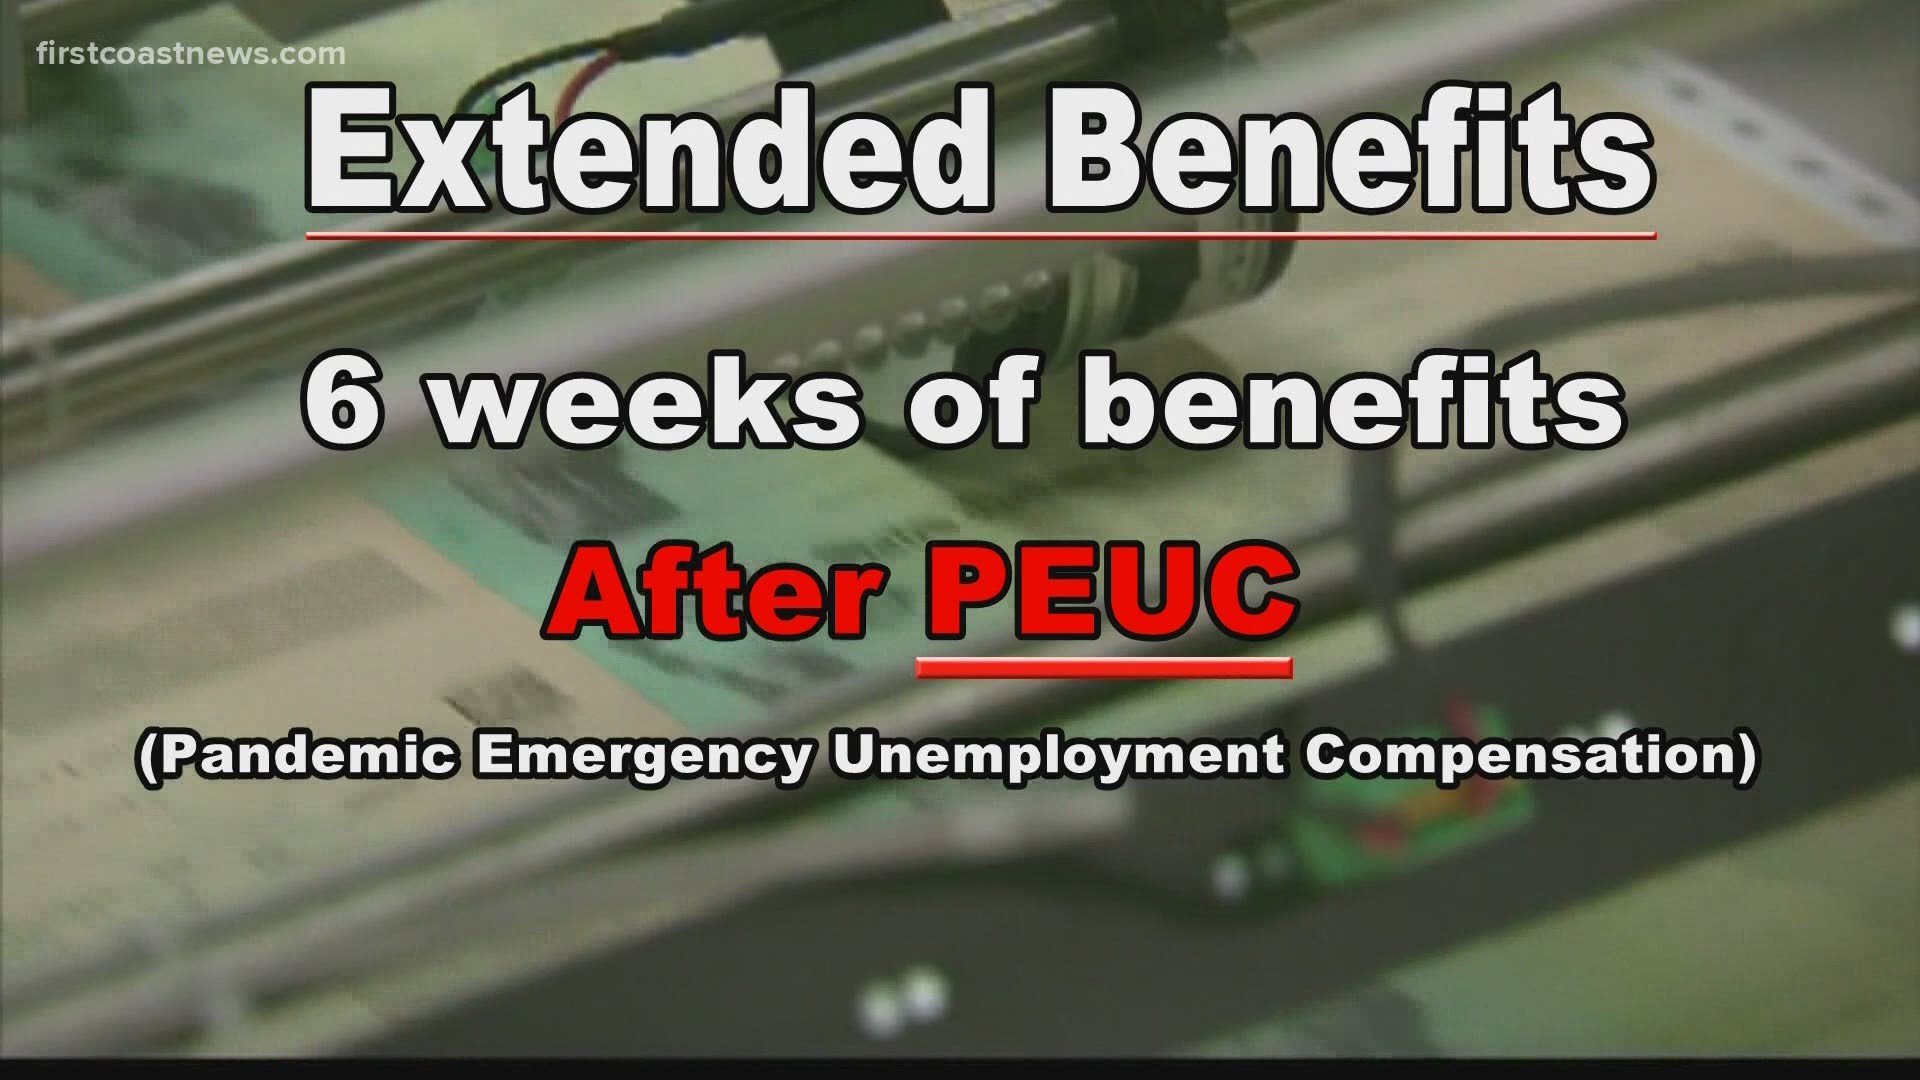 The large unemployment rate increase in March has triggered a program known as Extended Benefits and will be available to many unemployed Floridians who qualify.